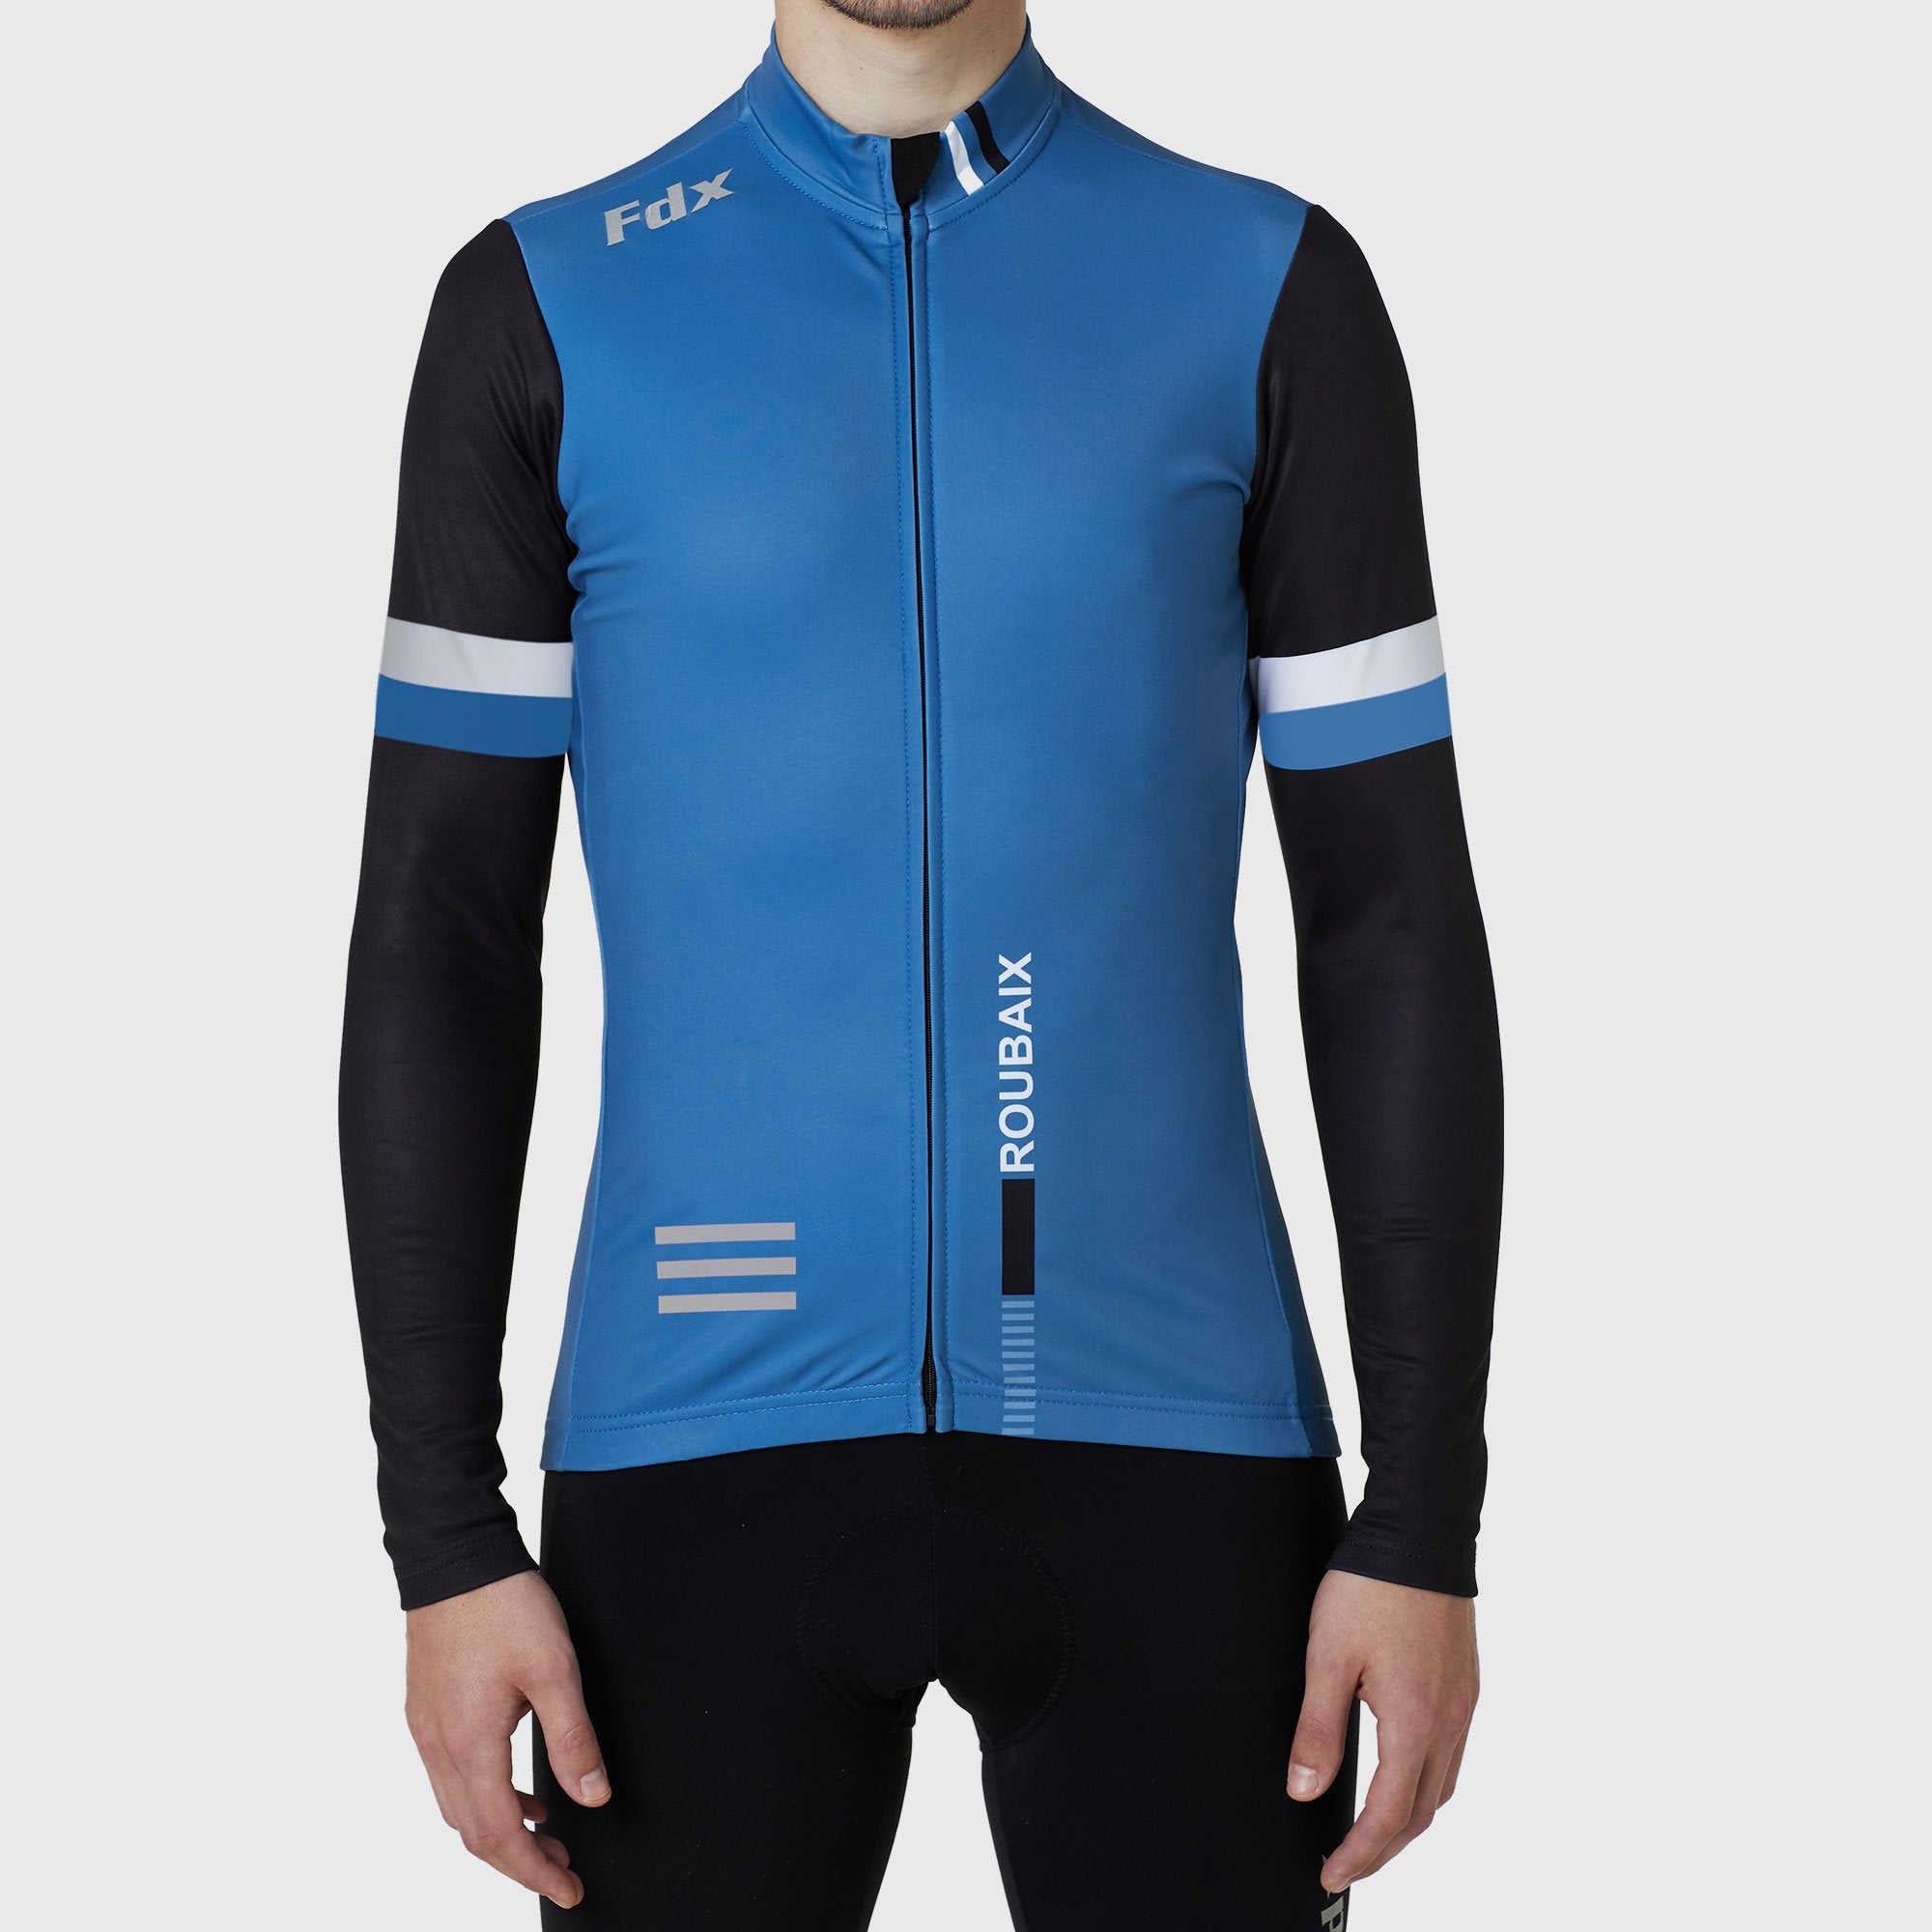 Fdx Limited Edition Blue Men\'s Long Sleeve Thermal Cycling Jersey | FDX  Sports® - FDX Sports US